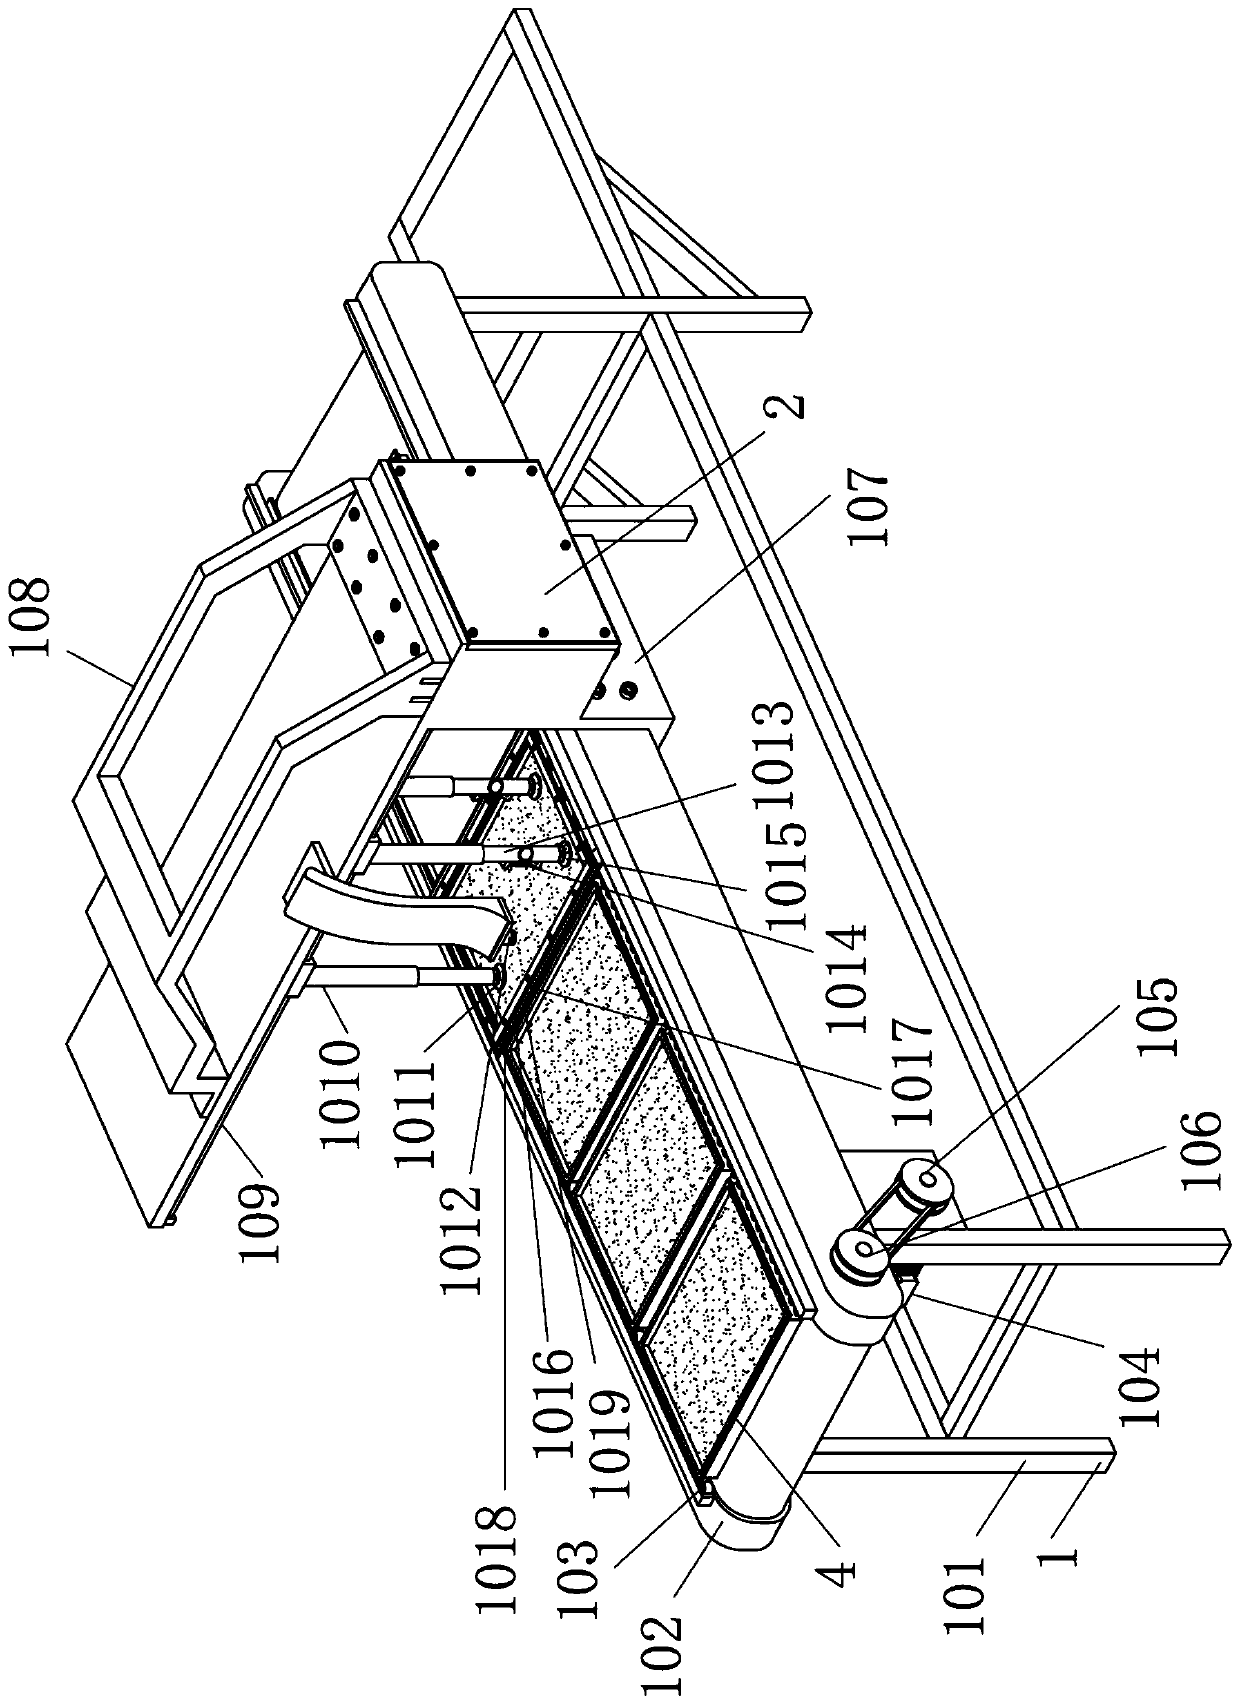 Automatic demolding device for prefabricated part